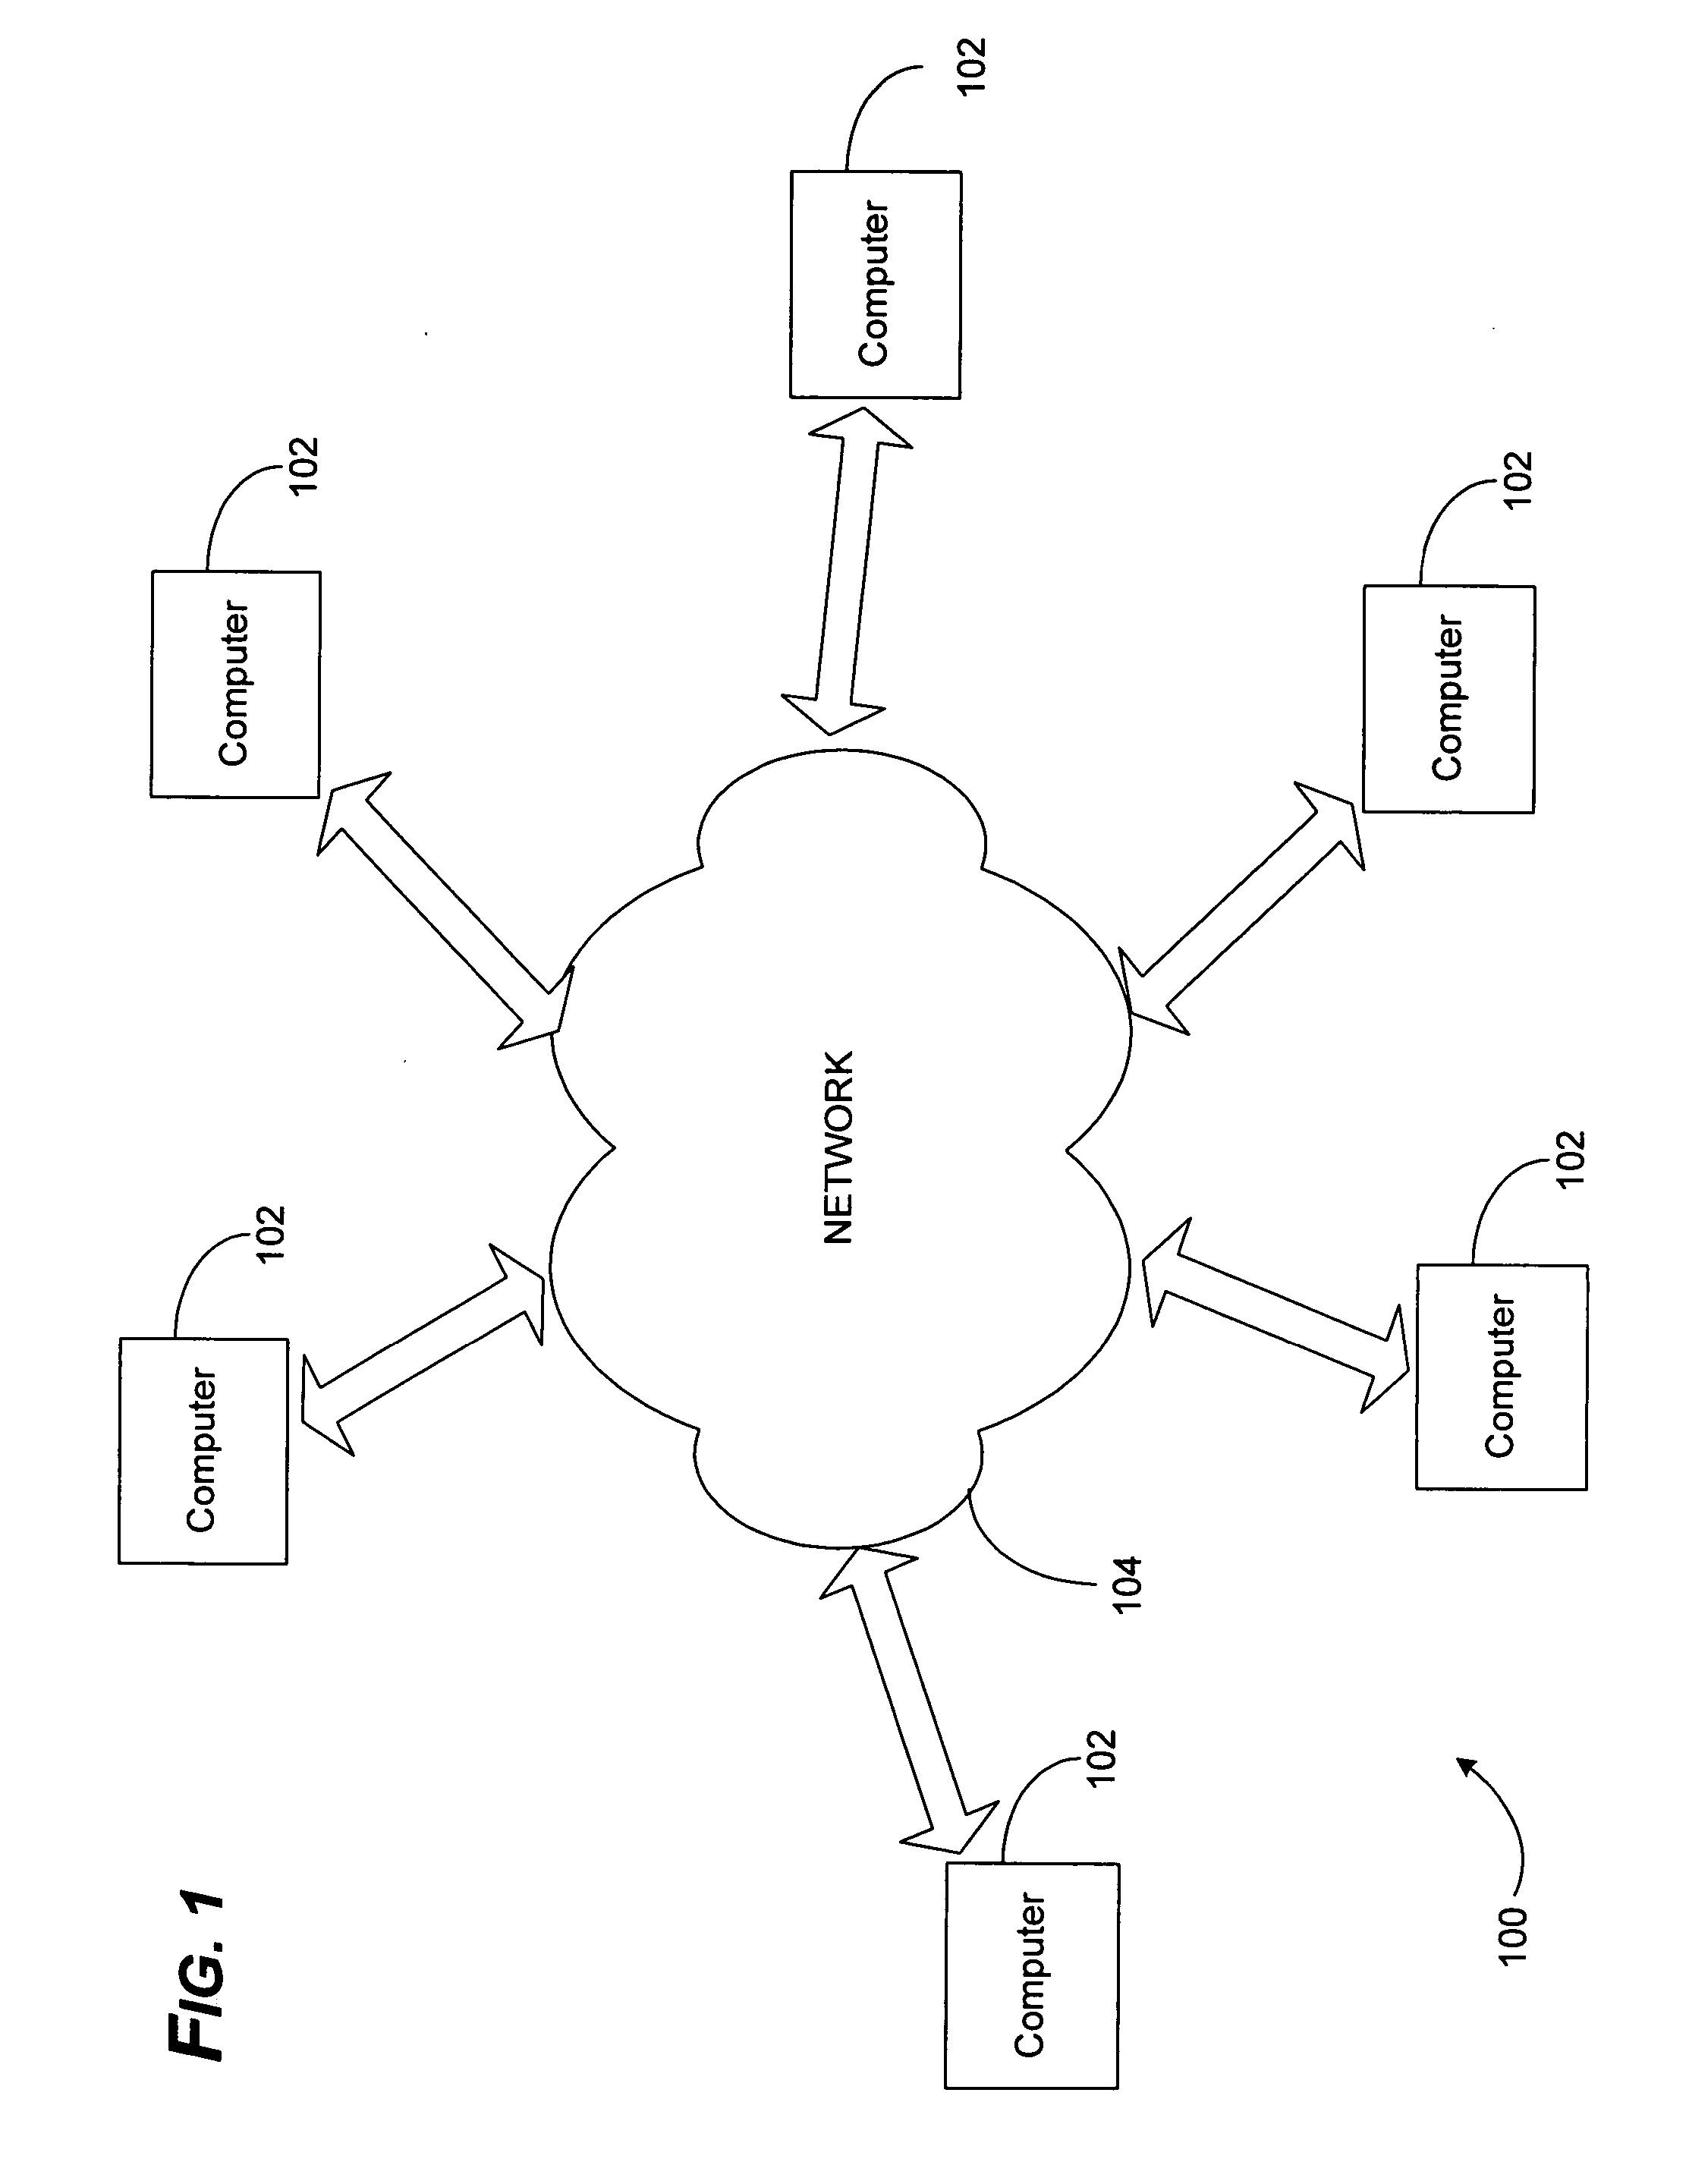 System and method for searching a peer-to-peer network